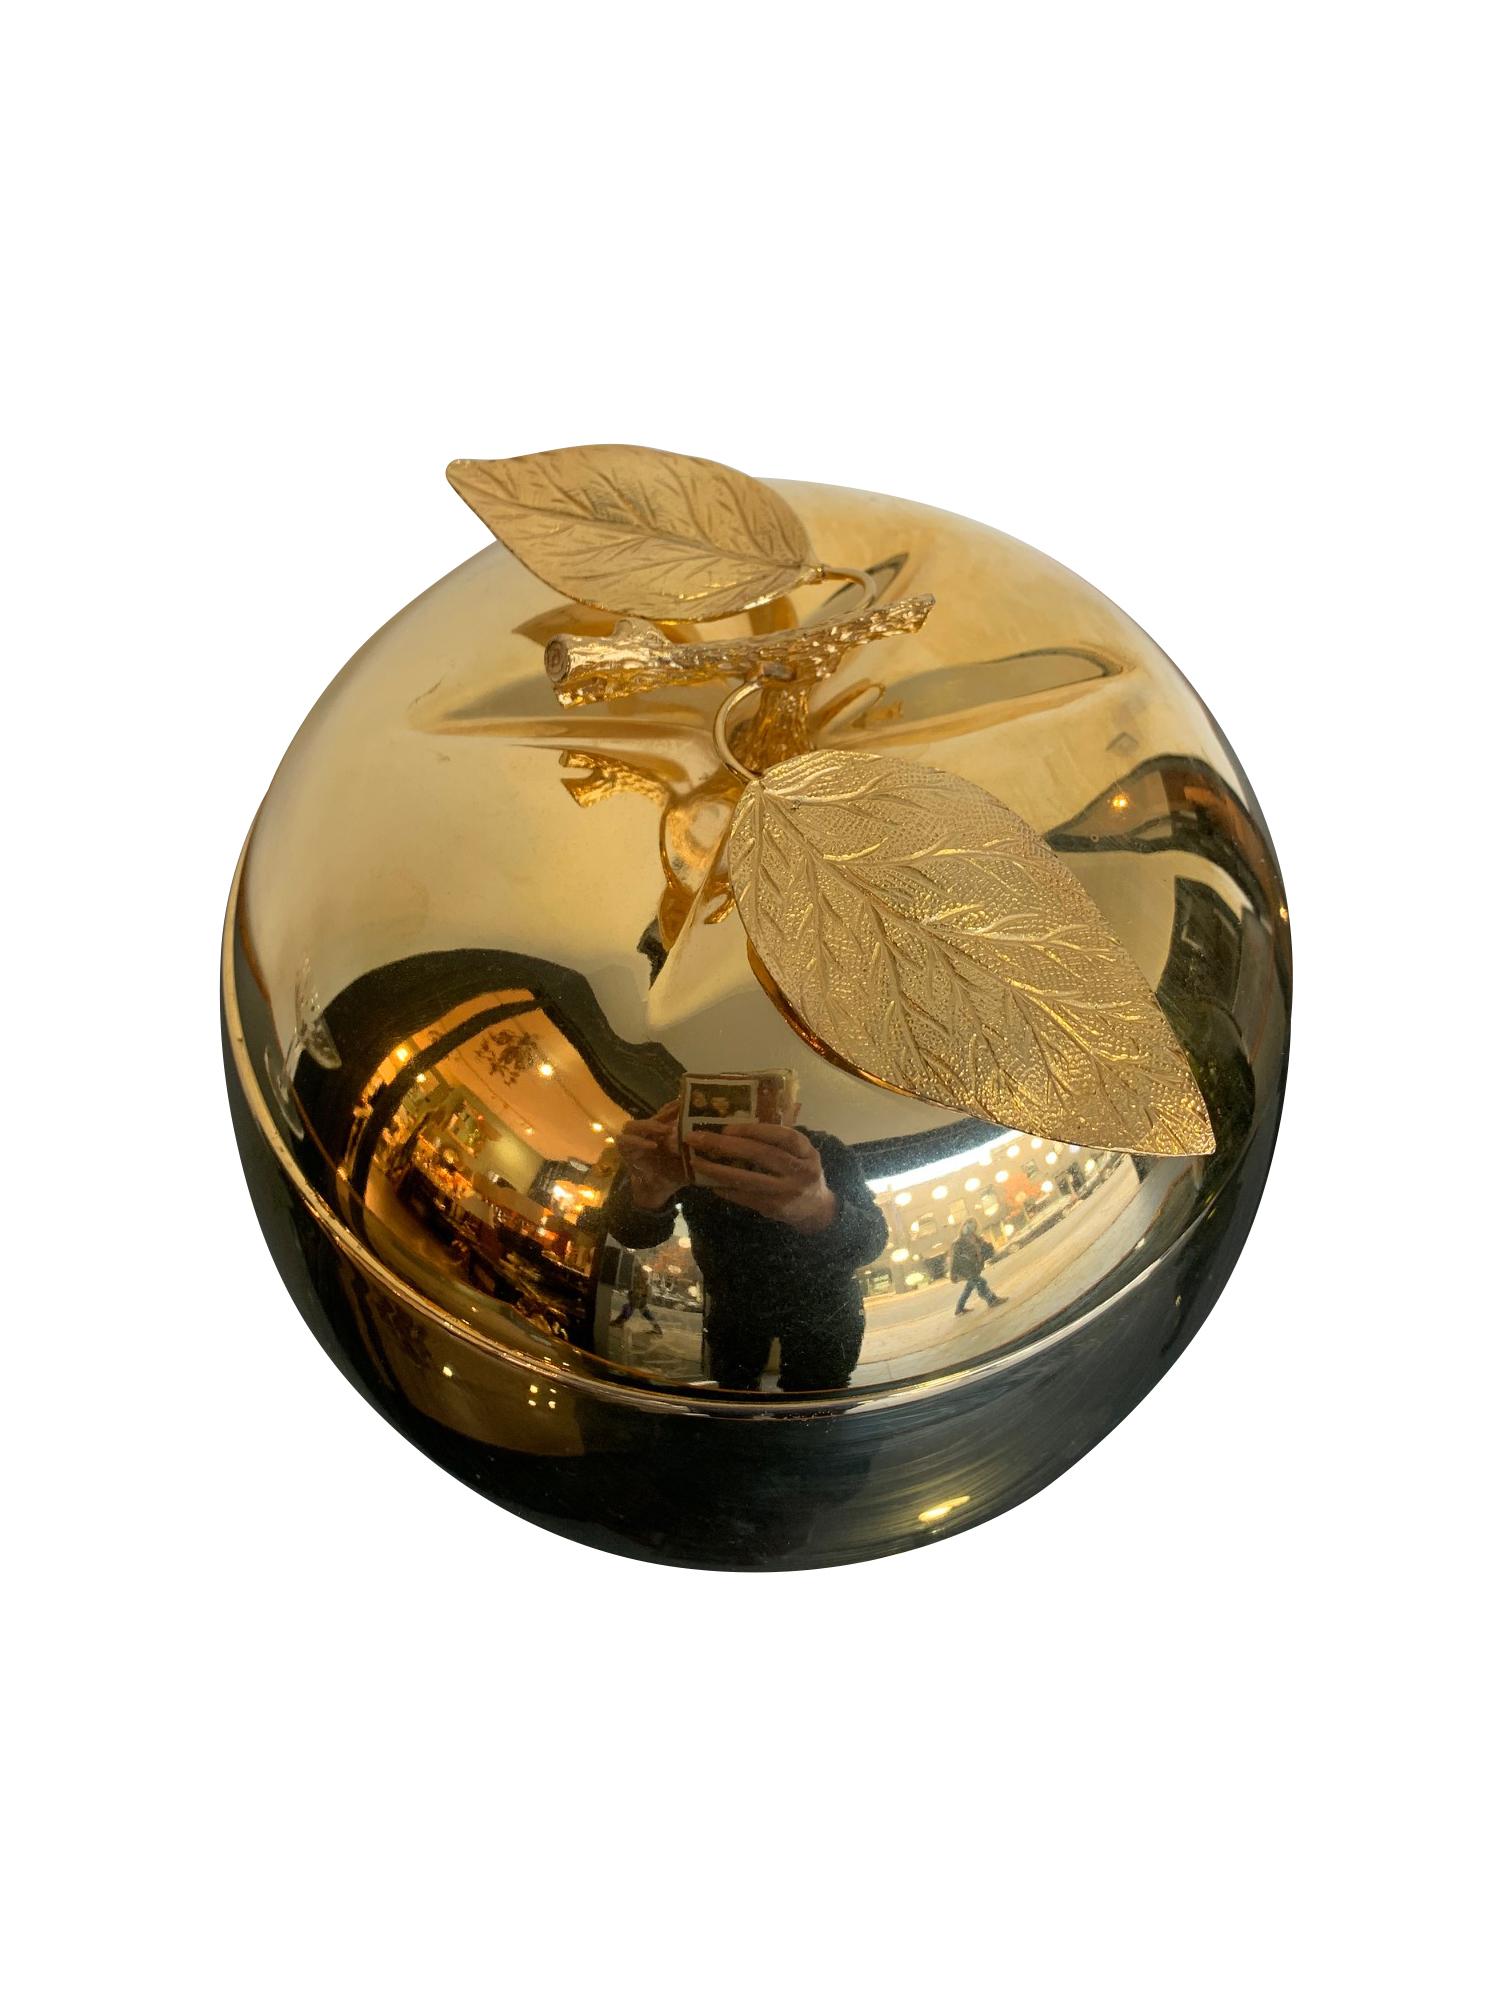 A 24-carat gold-plated apple shaped ice bucket with detailed leaf and stem handle. Made by The Turnwald Collection International for Freddotherm, with original label inside the top of the lid with white acrylic lining.
The large pear ice bucket,